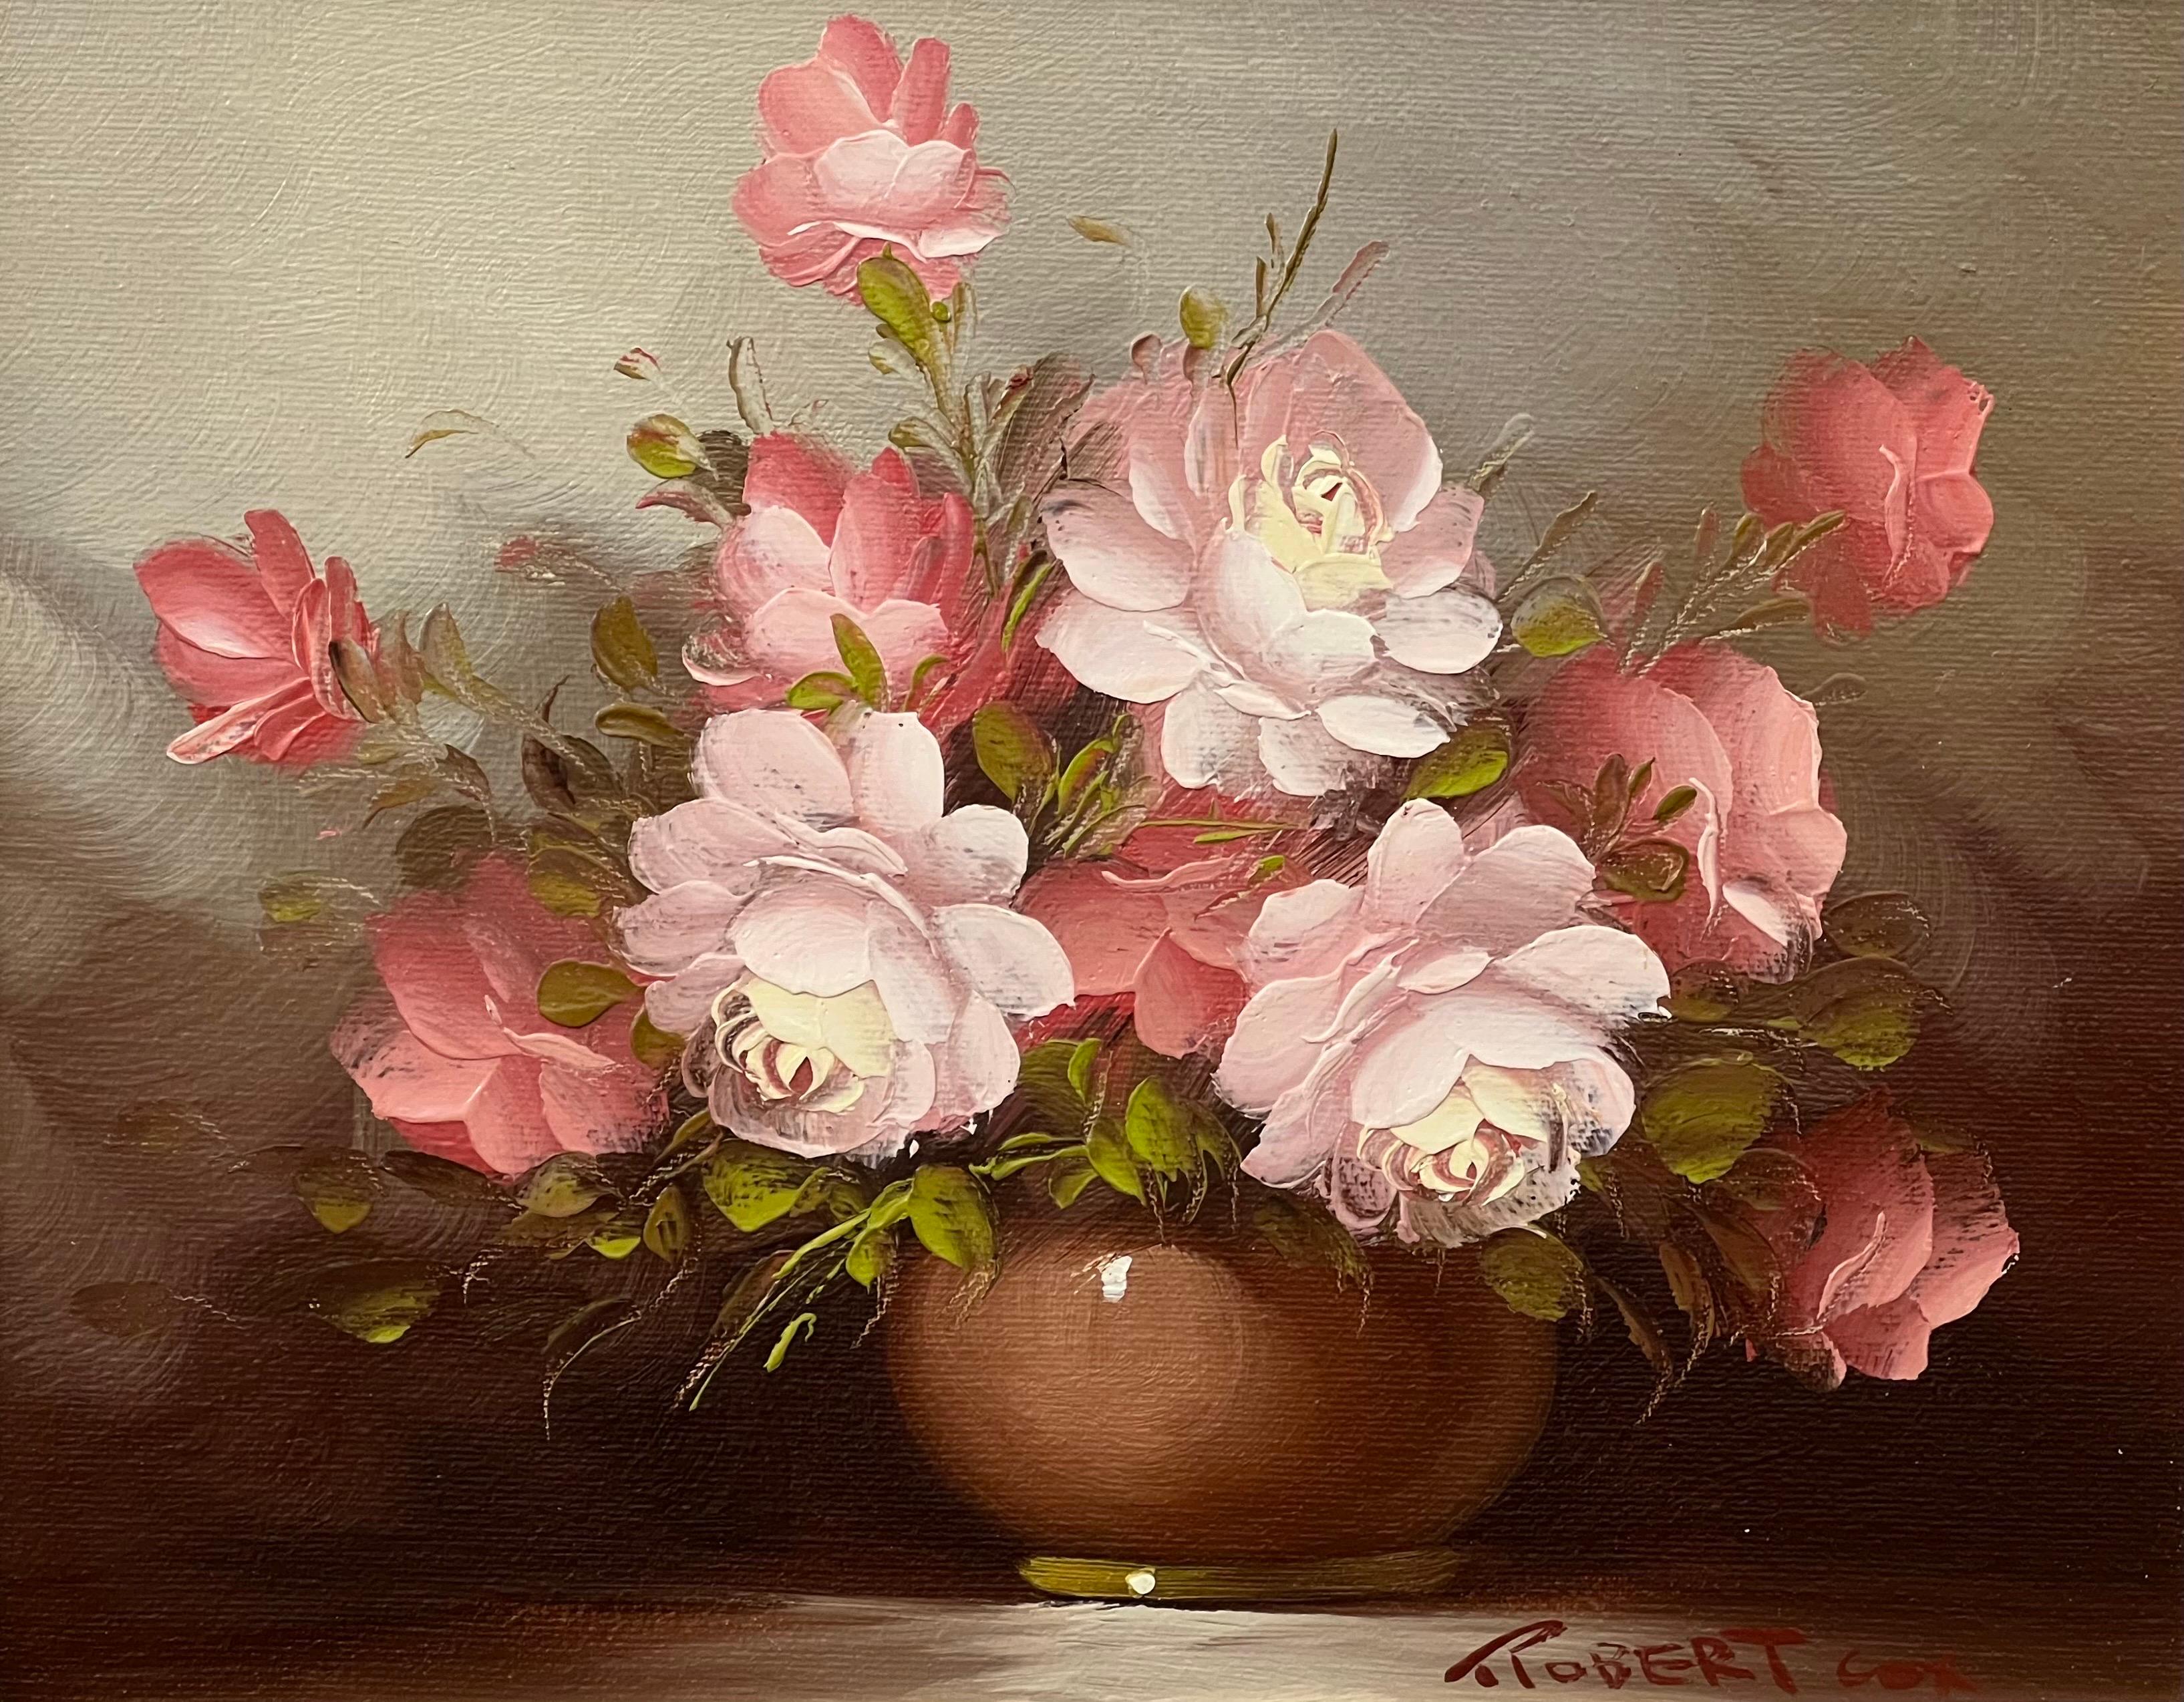 Still Life Painting of a Vase of Pink, Red & White Roses by 20th Century American Artist, Robert Cox (1934-2001)

Art measures 7.5 x 9.5 inches (unframed)
Framing by arrangement

Award-Winning American artist, Robert Cox, studied at the Katharine